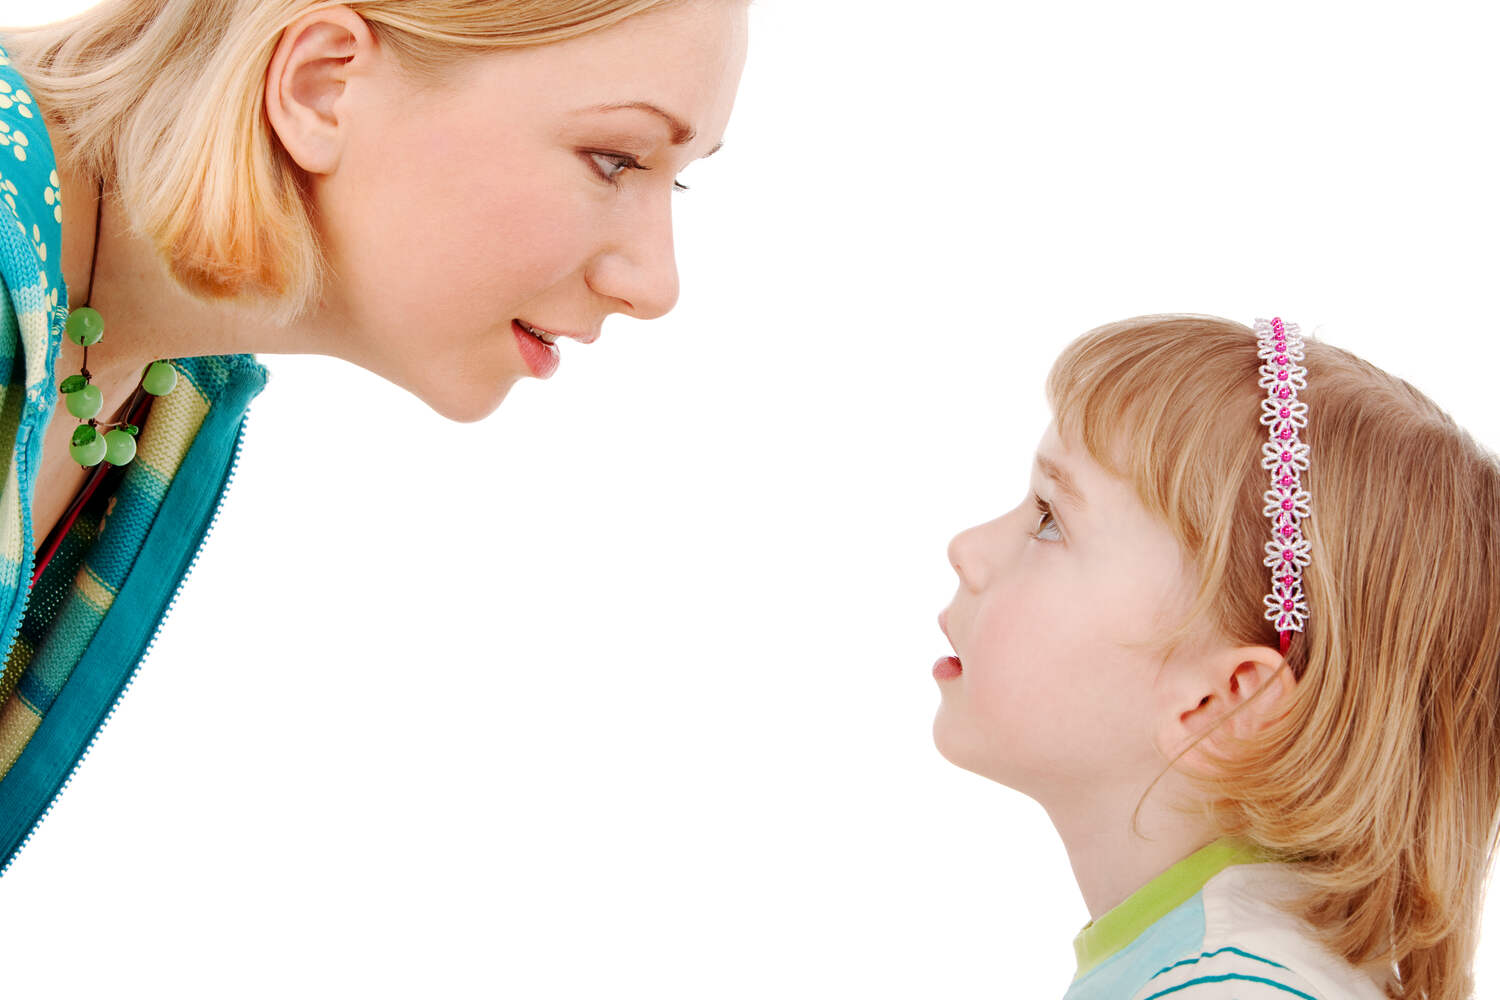 Teach your child to look into the eyes of the other person while talking